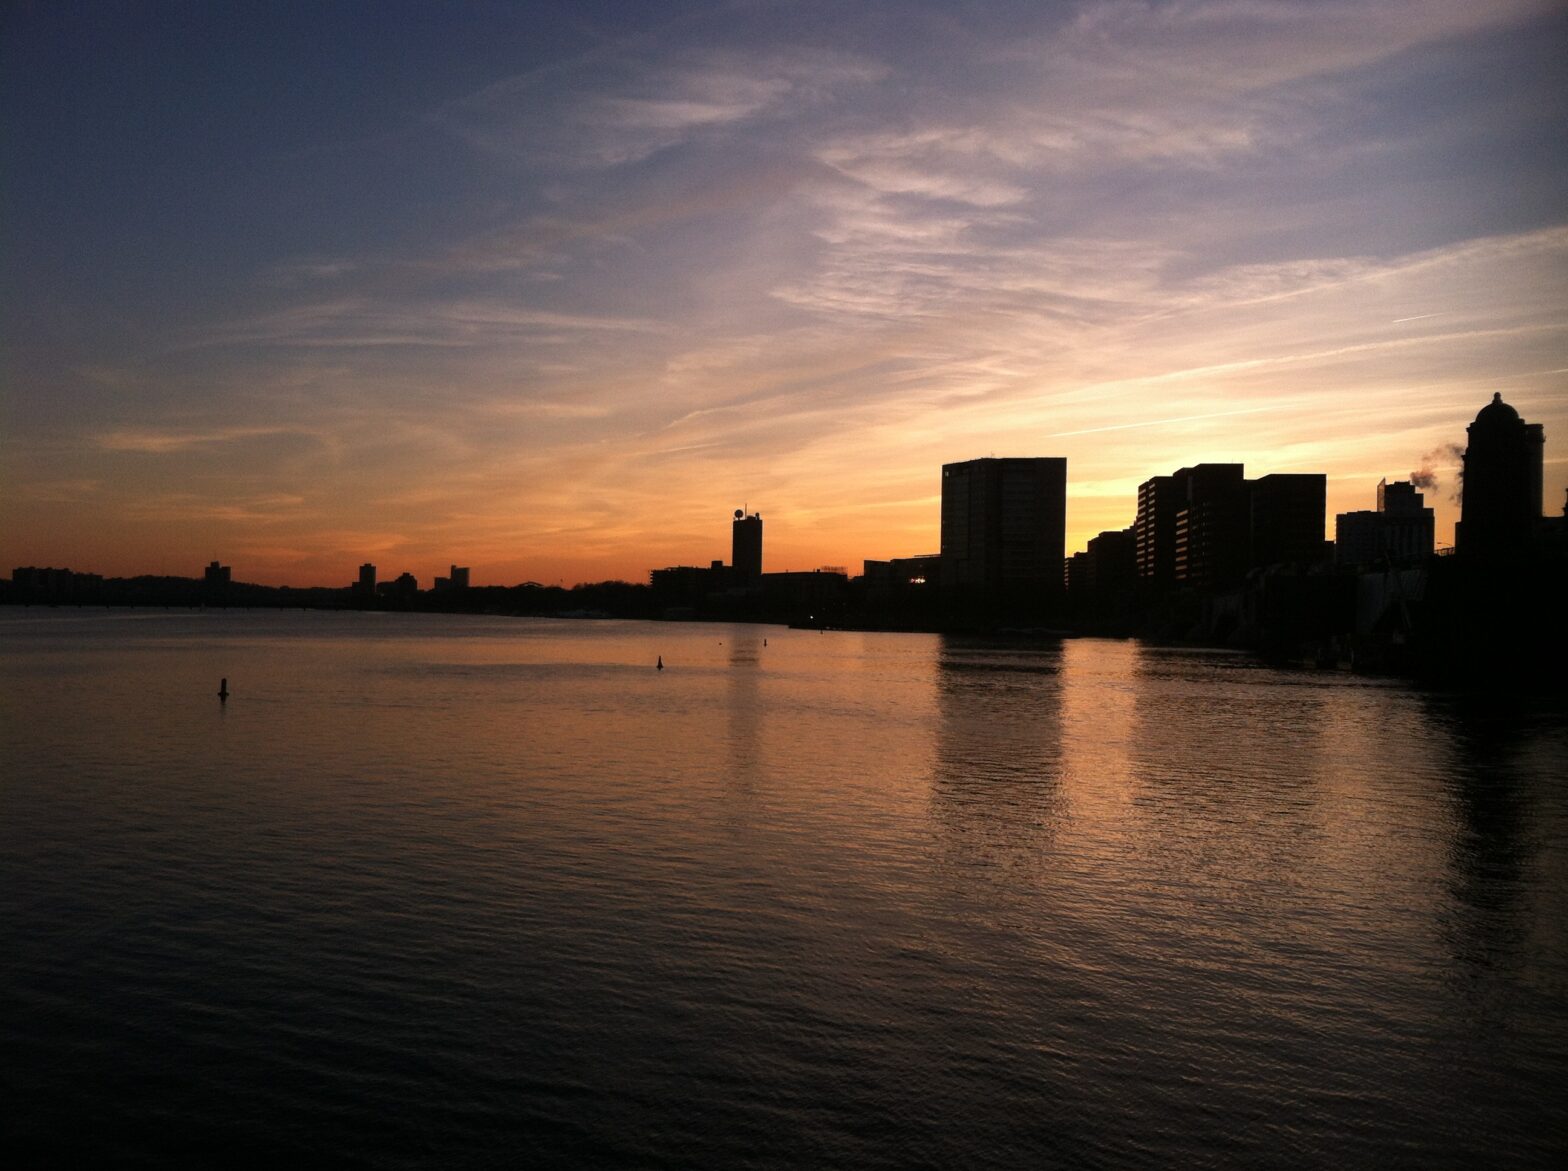 The sunset in Boston is one of the beautiful things visitors can see when they visit. Check out the areas that make it hard for visitors to choose where to stay in Boston.